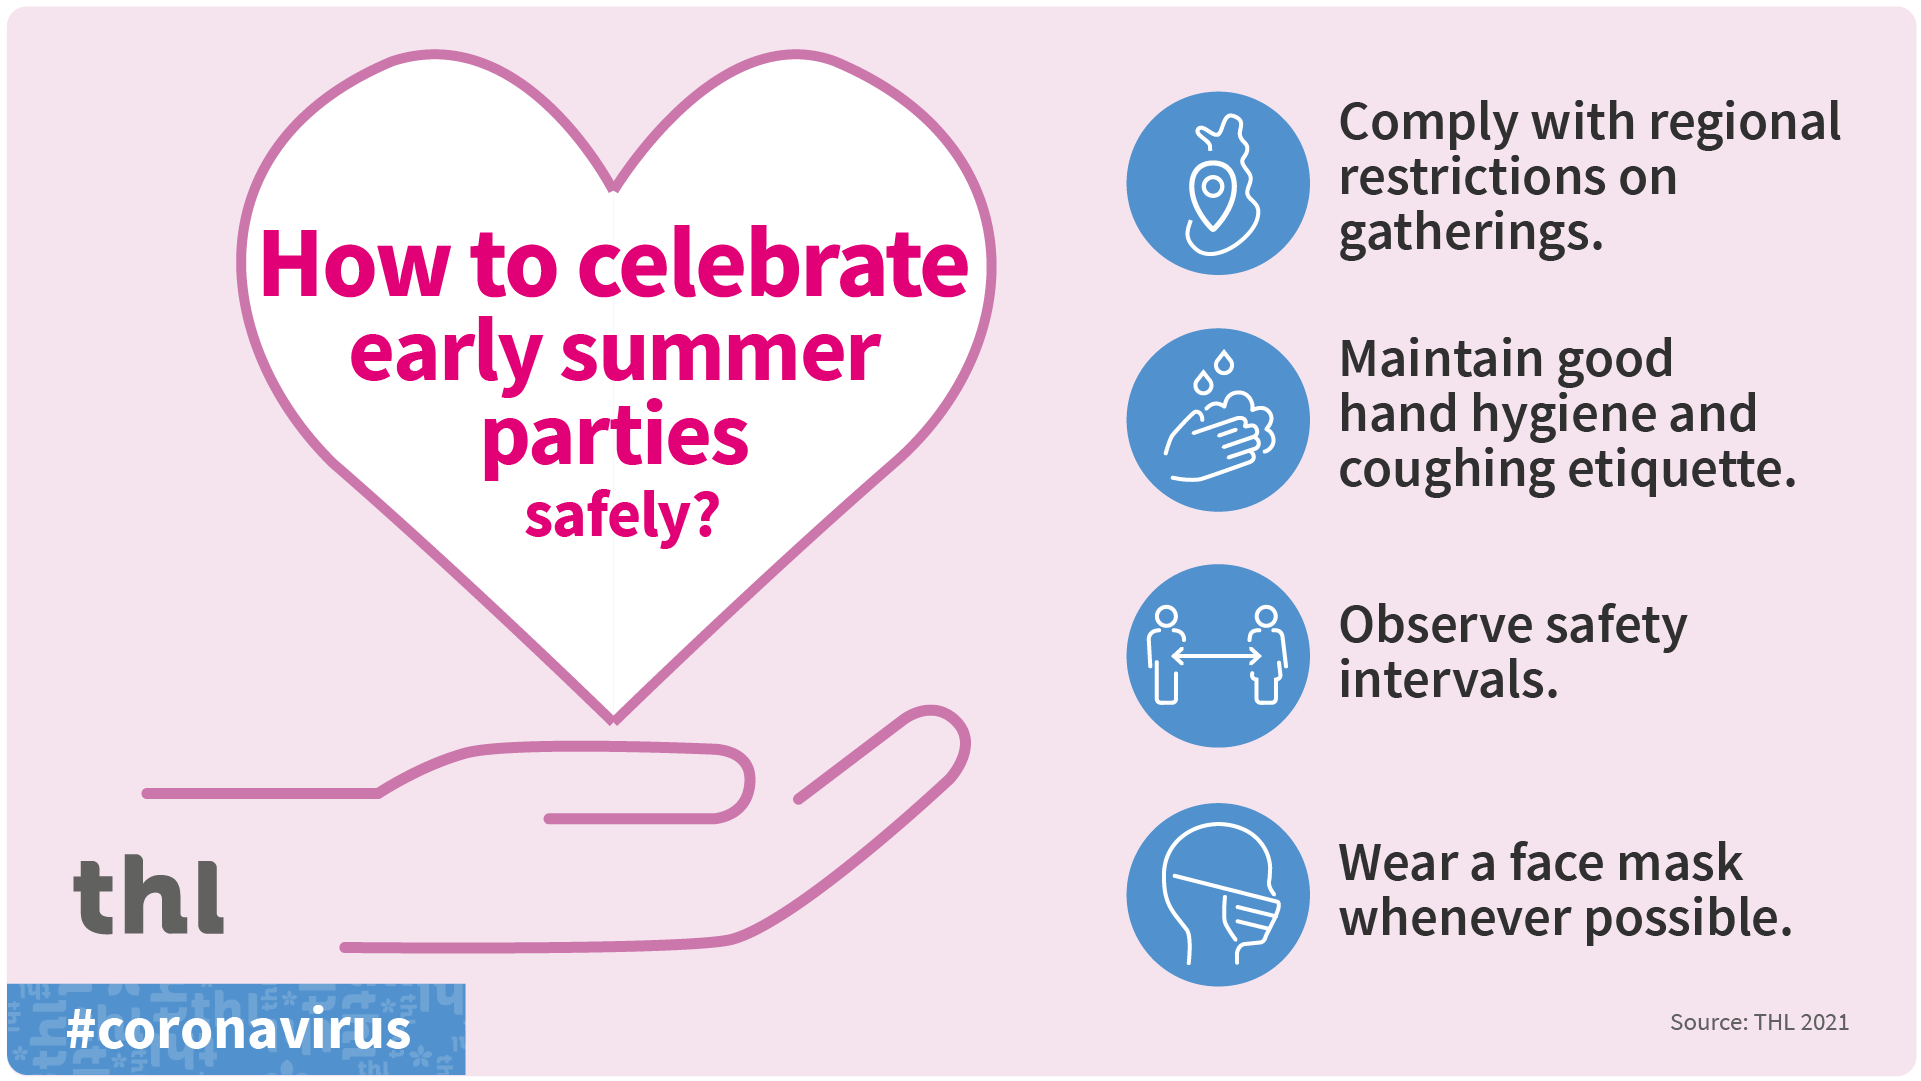 How to celebrate summer parties safely?